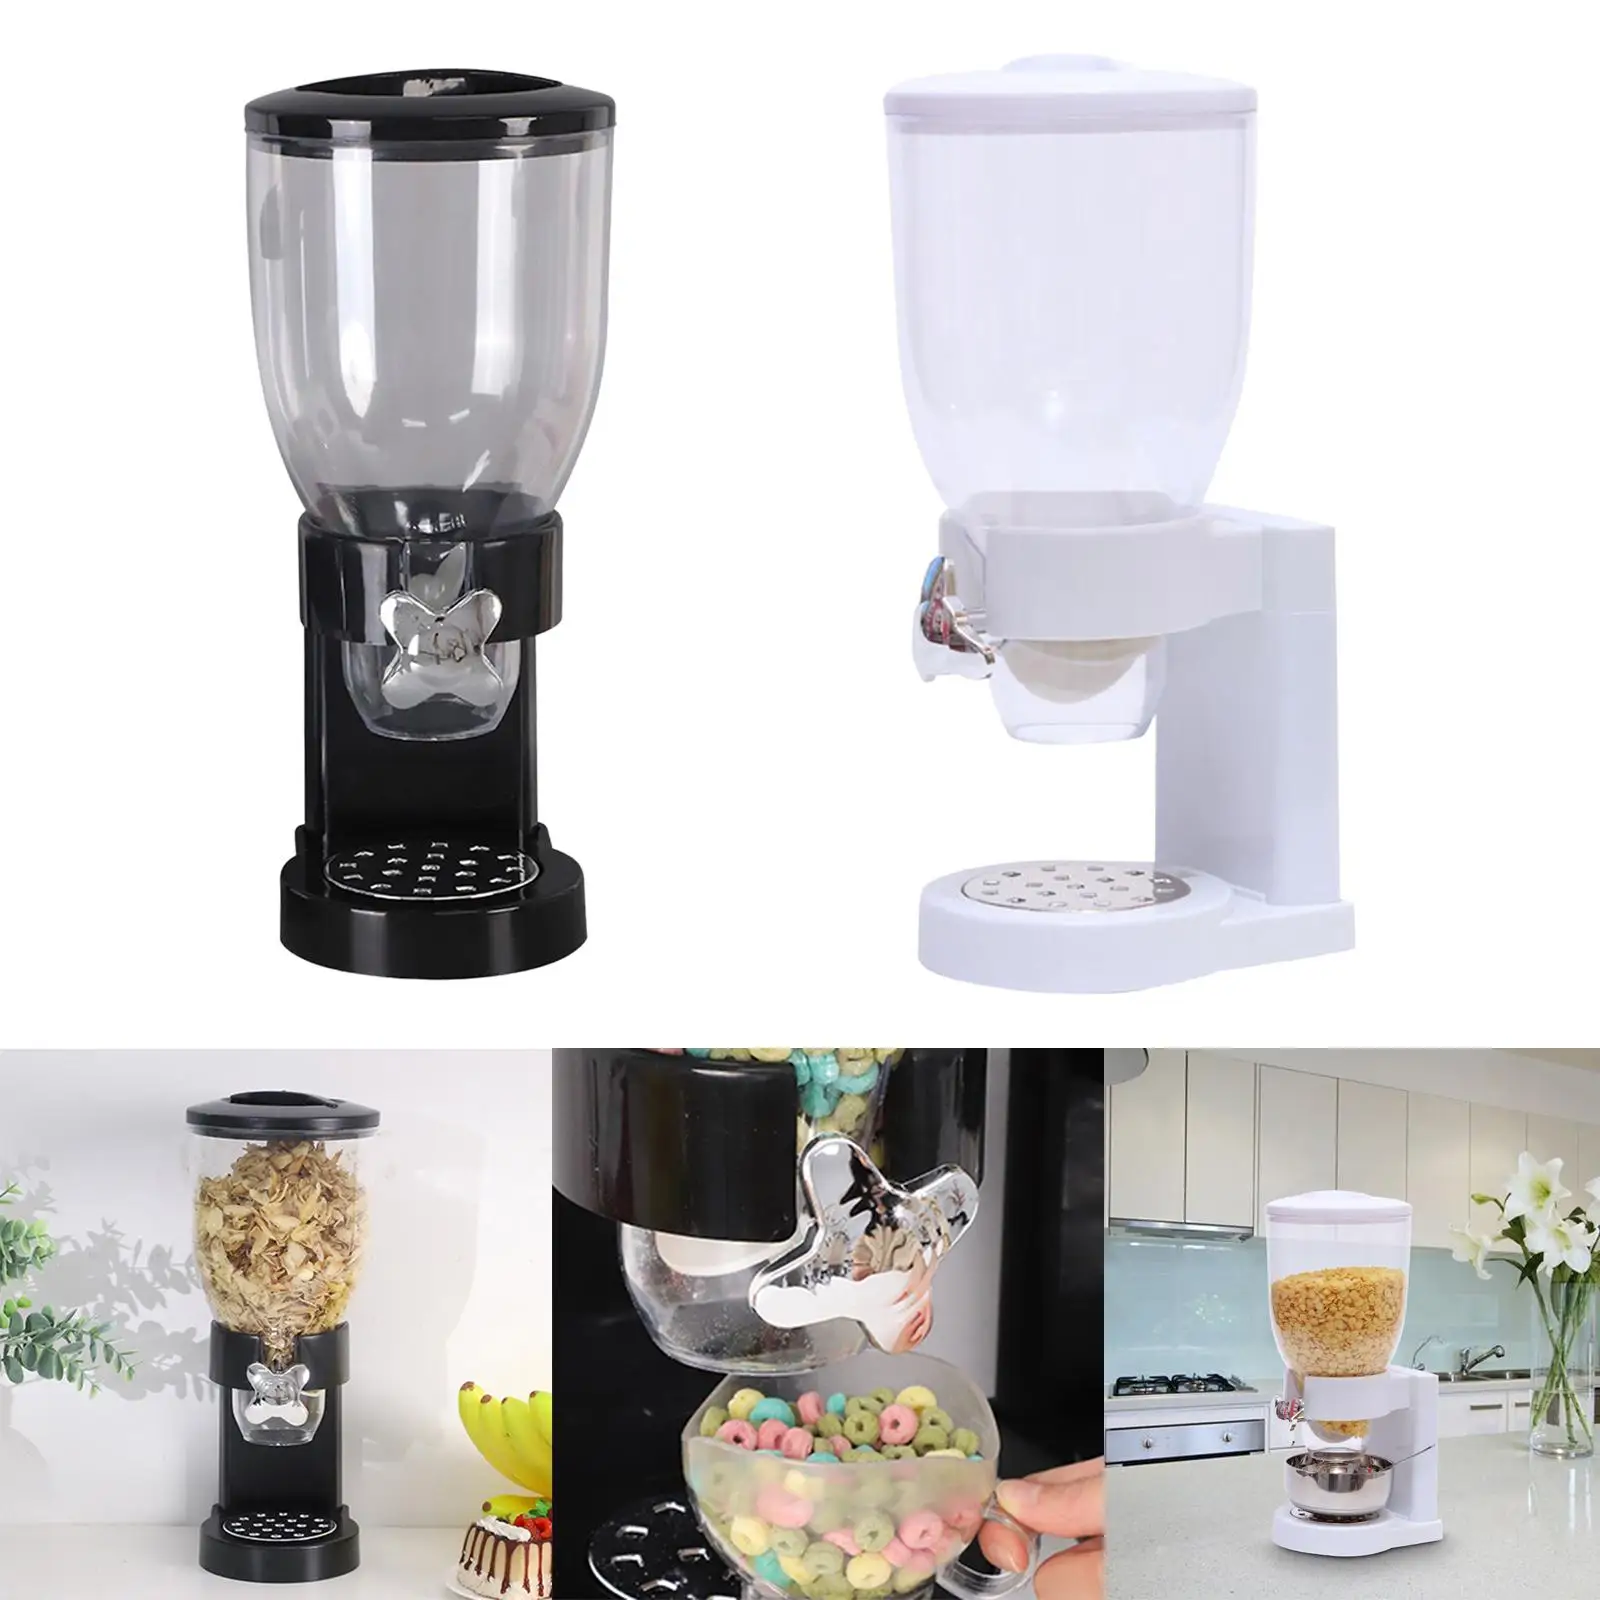 Cereal Dispenser Tight Storage Bottles Dry Food Dispenser Machine Food Dispensers for Office Breakroom Home Oatmeal Coffee Beans